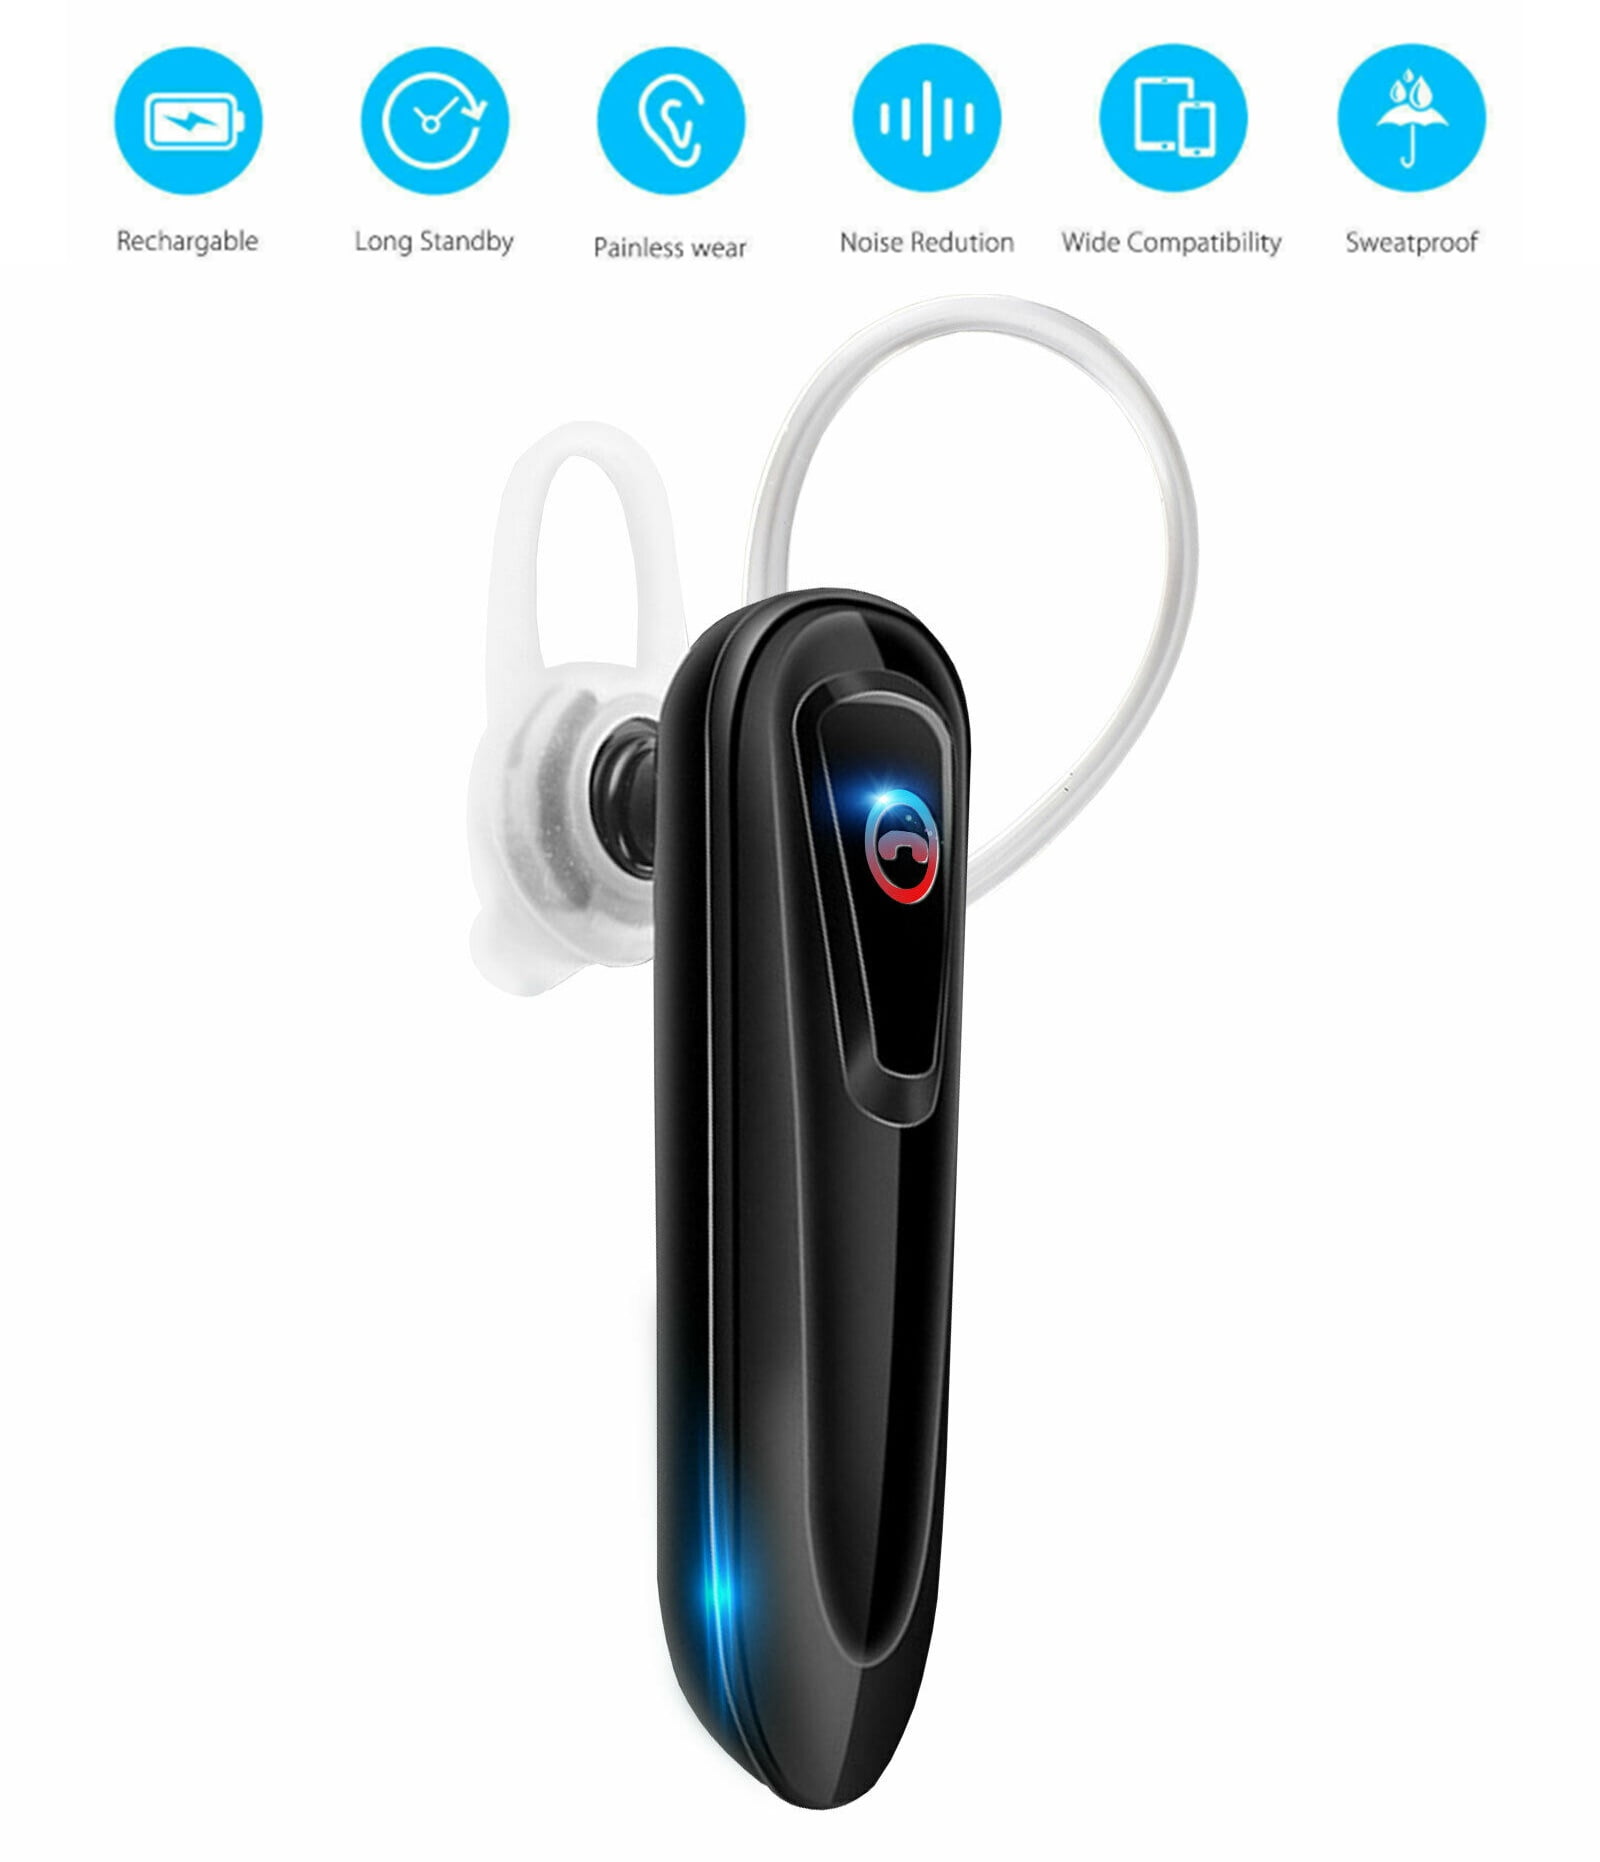 Upgraded Active Noise Cancelling Bluetooth Headphones Bluetooth Earpiece CVC8.0 Dual-Mic Hands-Free V5.0 Comfortable Earbud 240 Hrs Standby Time for Business/Workout/Driving Bluetooth Headset 